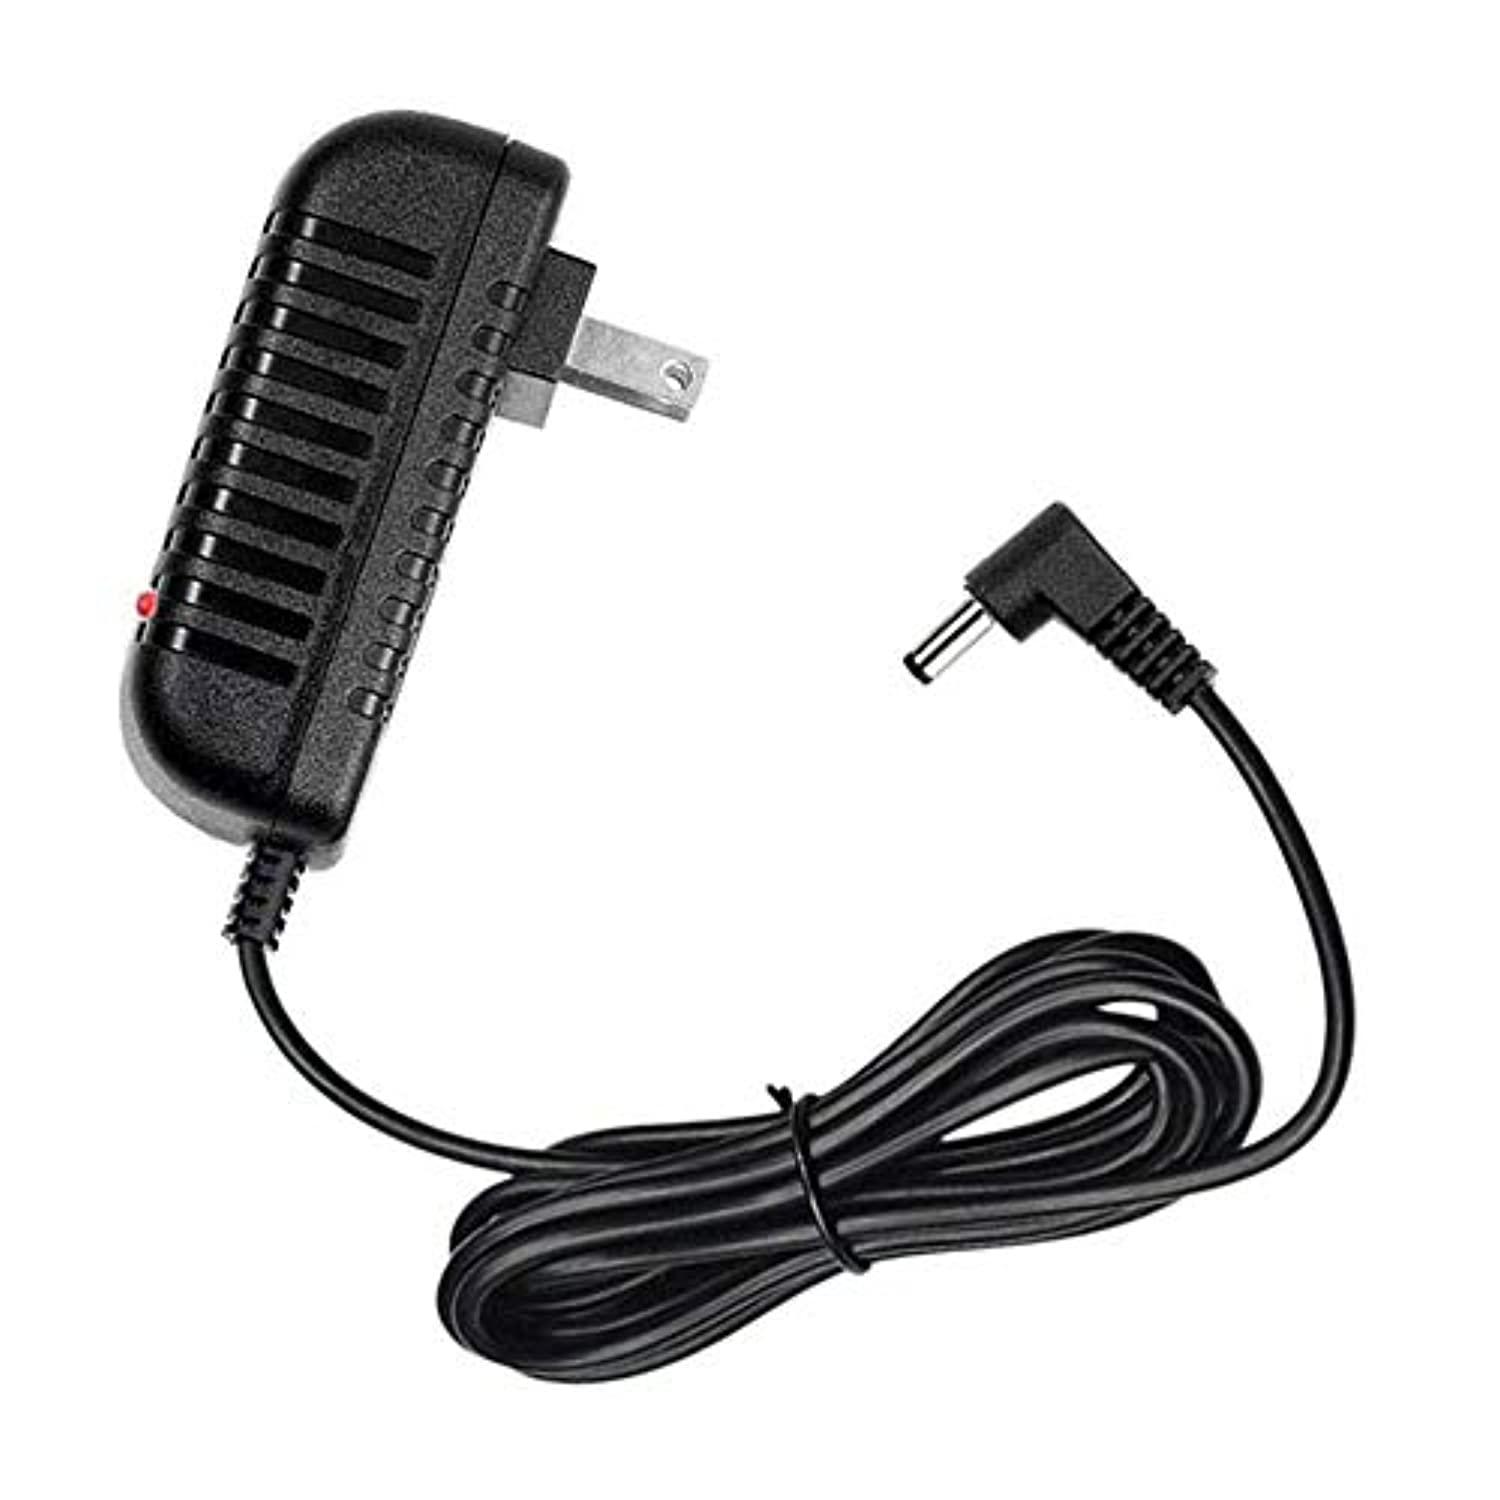 POWE-Tech ac adapter for nec itl-12d itl-12d-1 690002 690003 ip phone voip telephone power, 5 feet, with led indicator